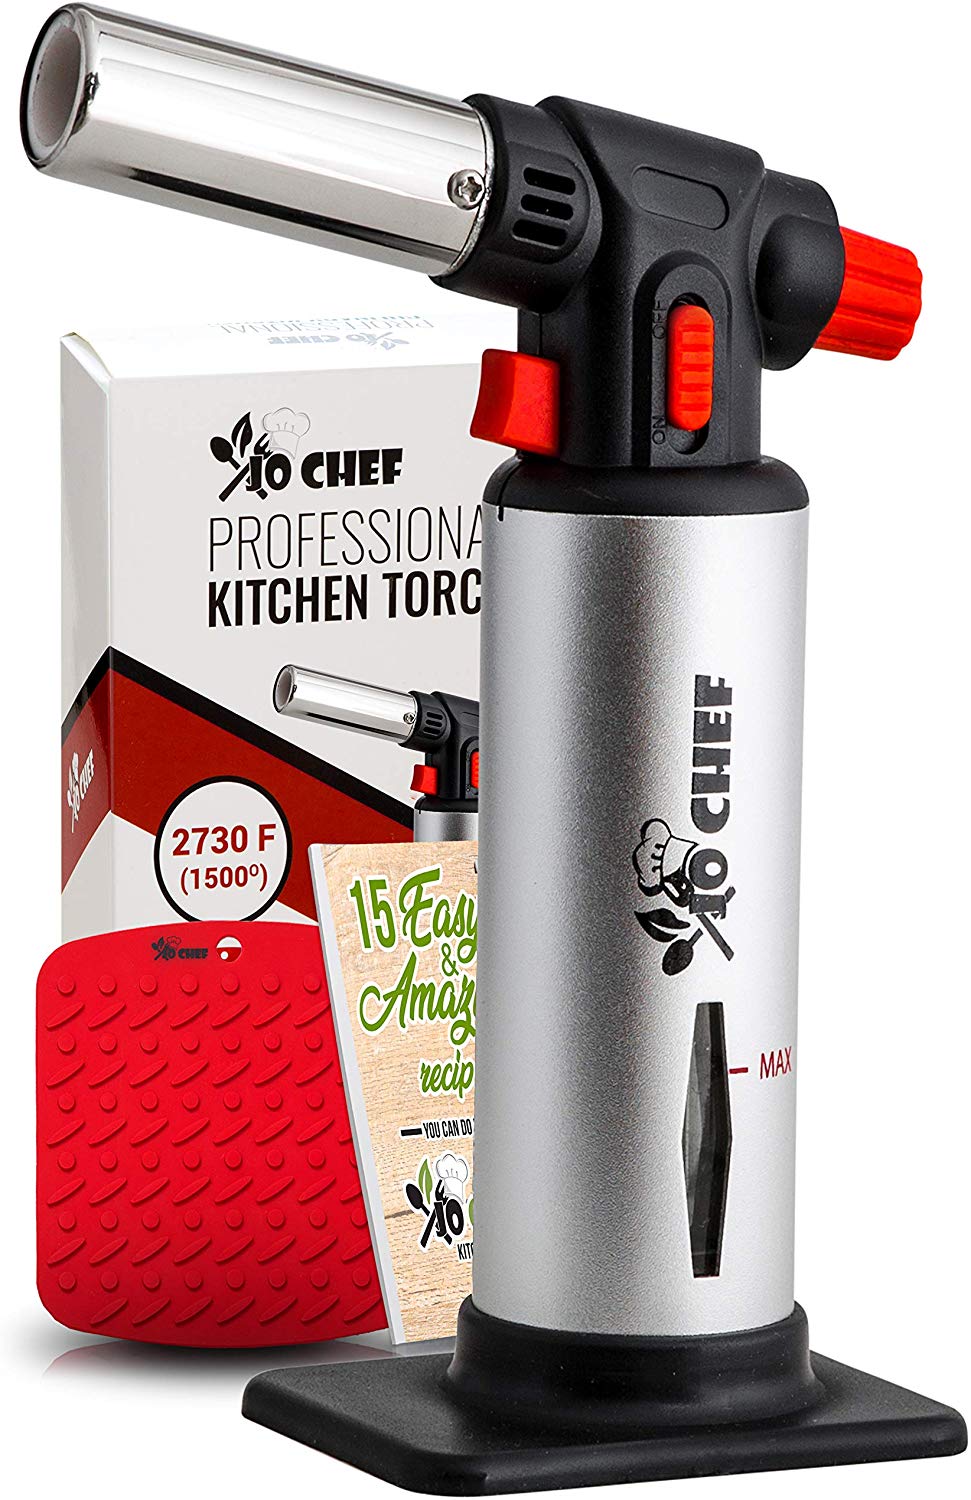 Gas Torch Kitchen Butane Torch Culinary Torch for Home Cooking Camping